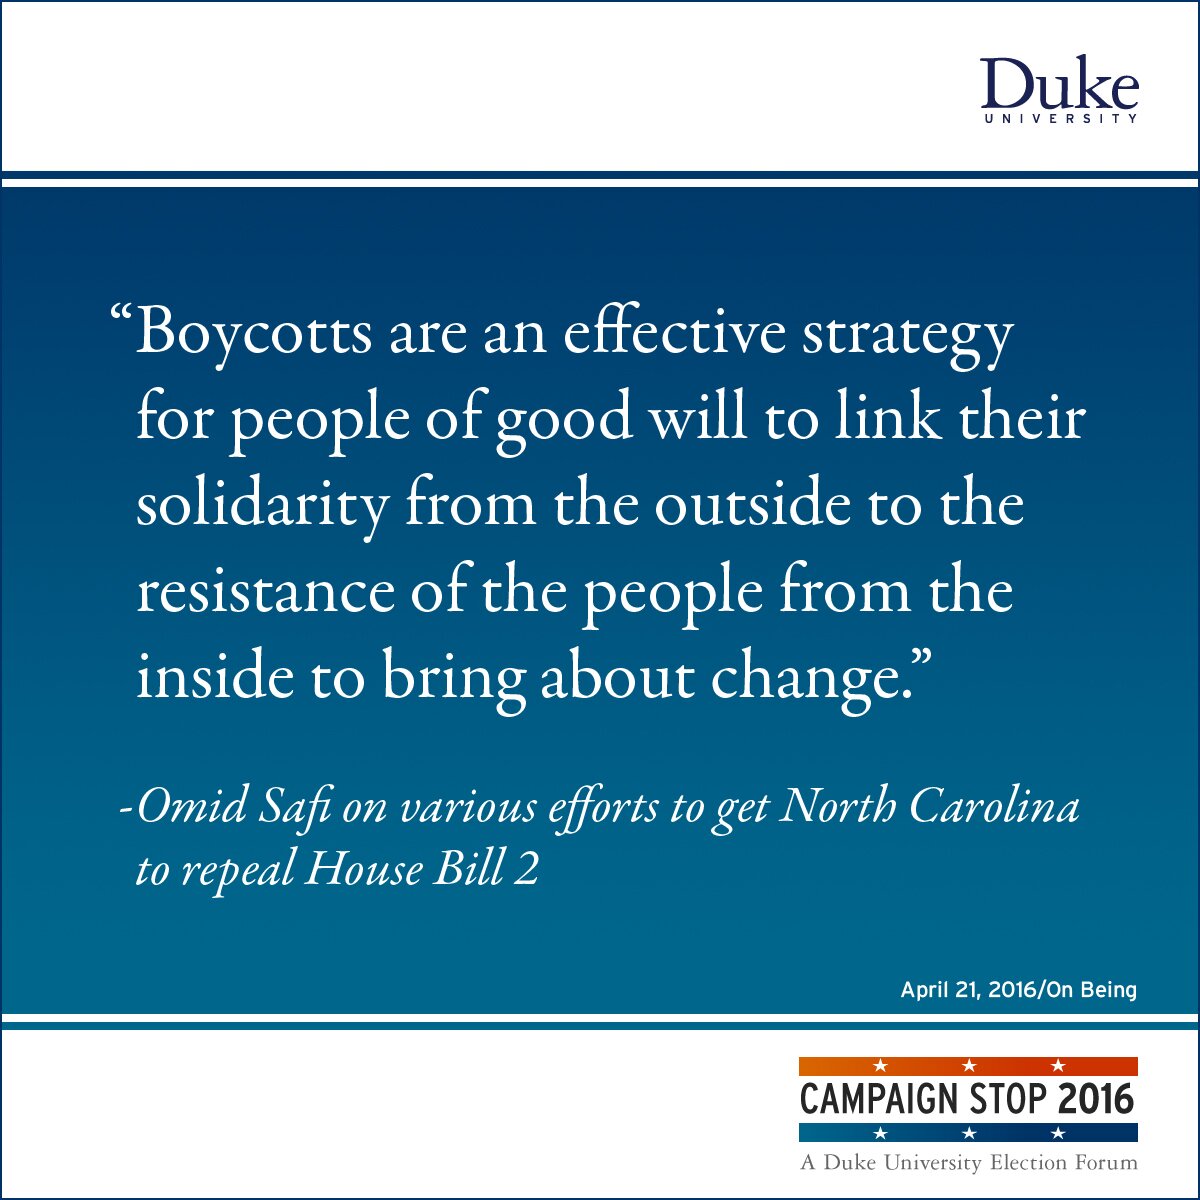 “Boycotts are an effective strategy for people of good will to link their solidarity from the outside to the resistance of the people from the inside to bring about change.” -Omid Safi on various efforts to get North Carolina to repeal House Bill 2